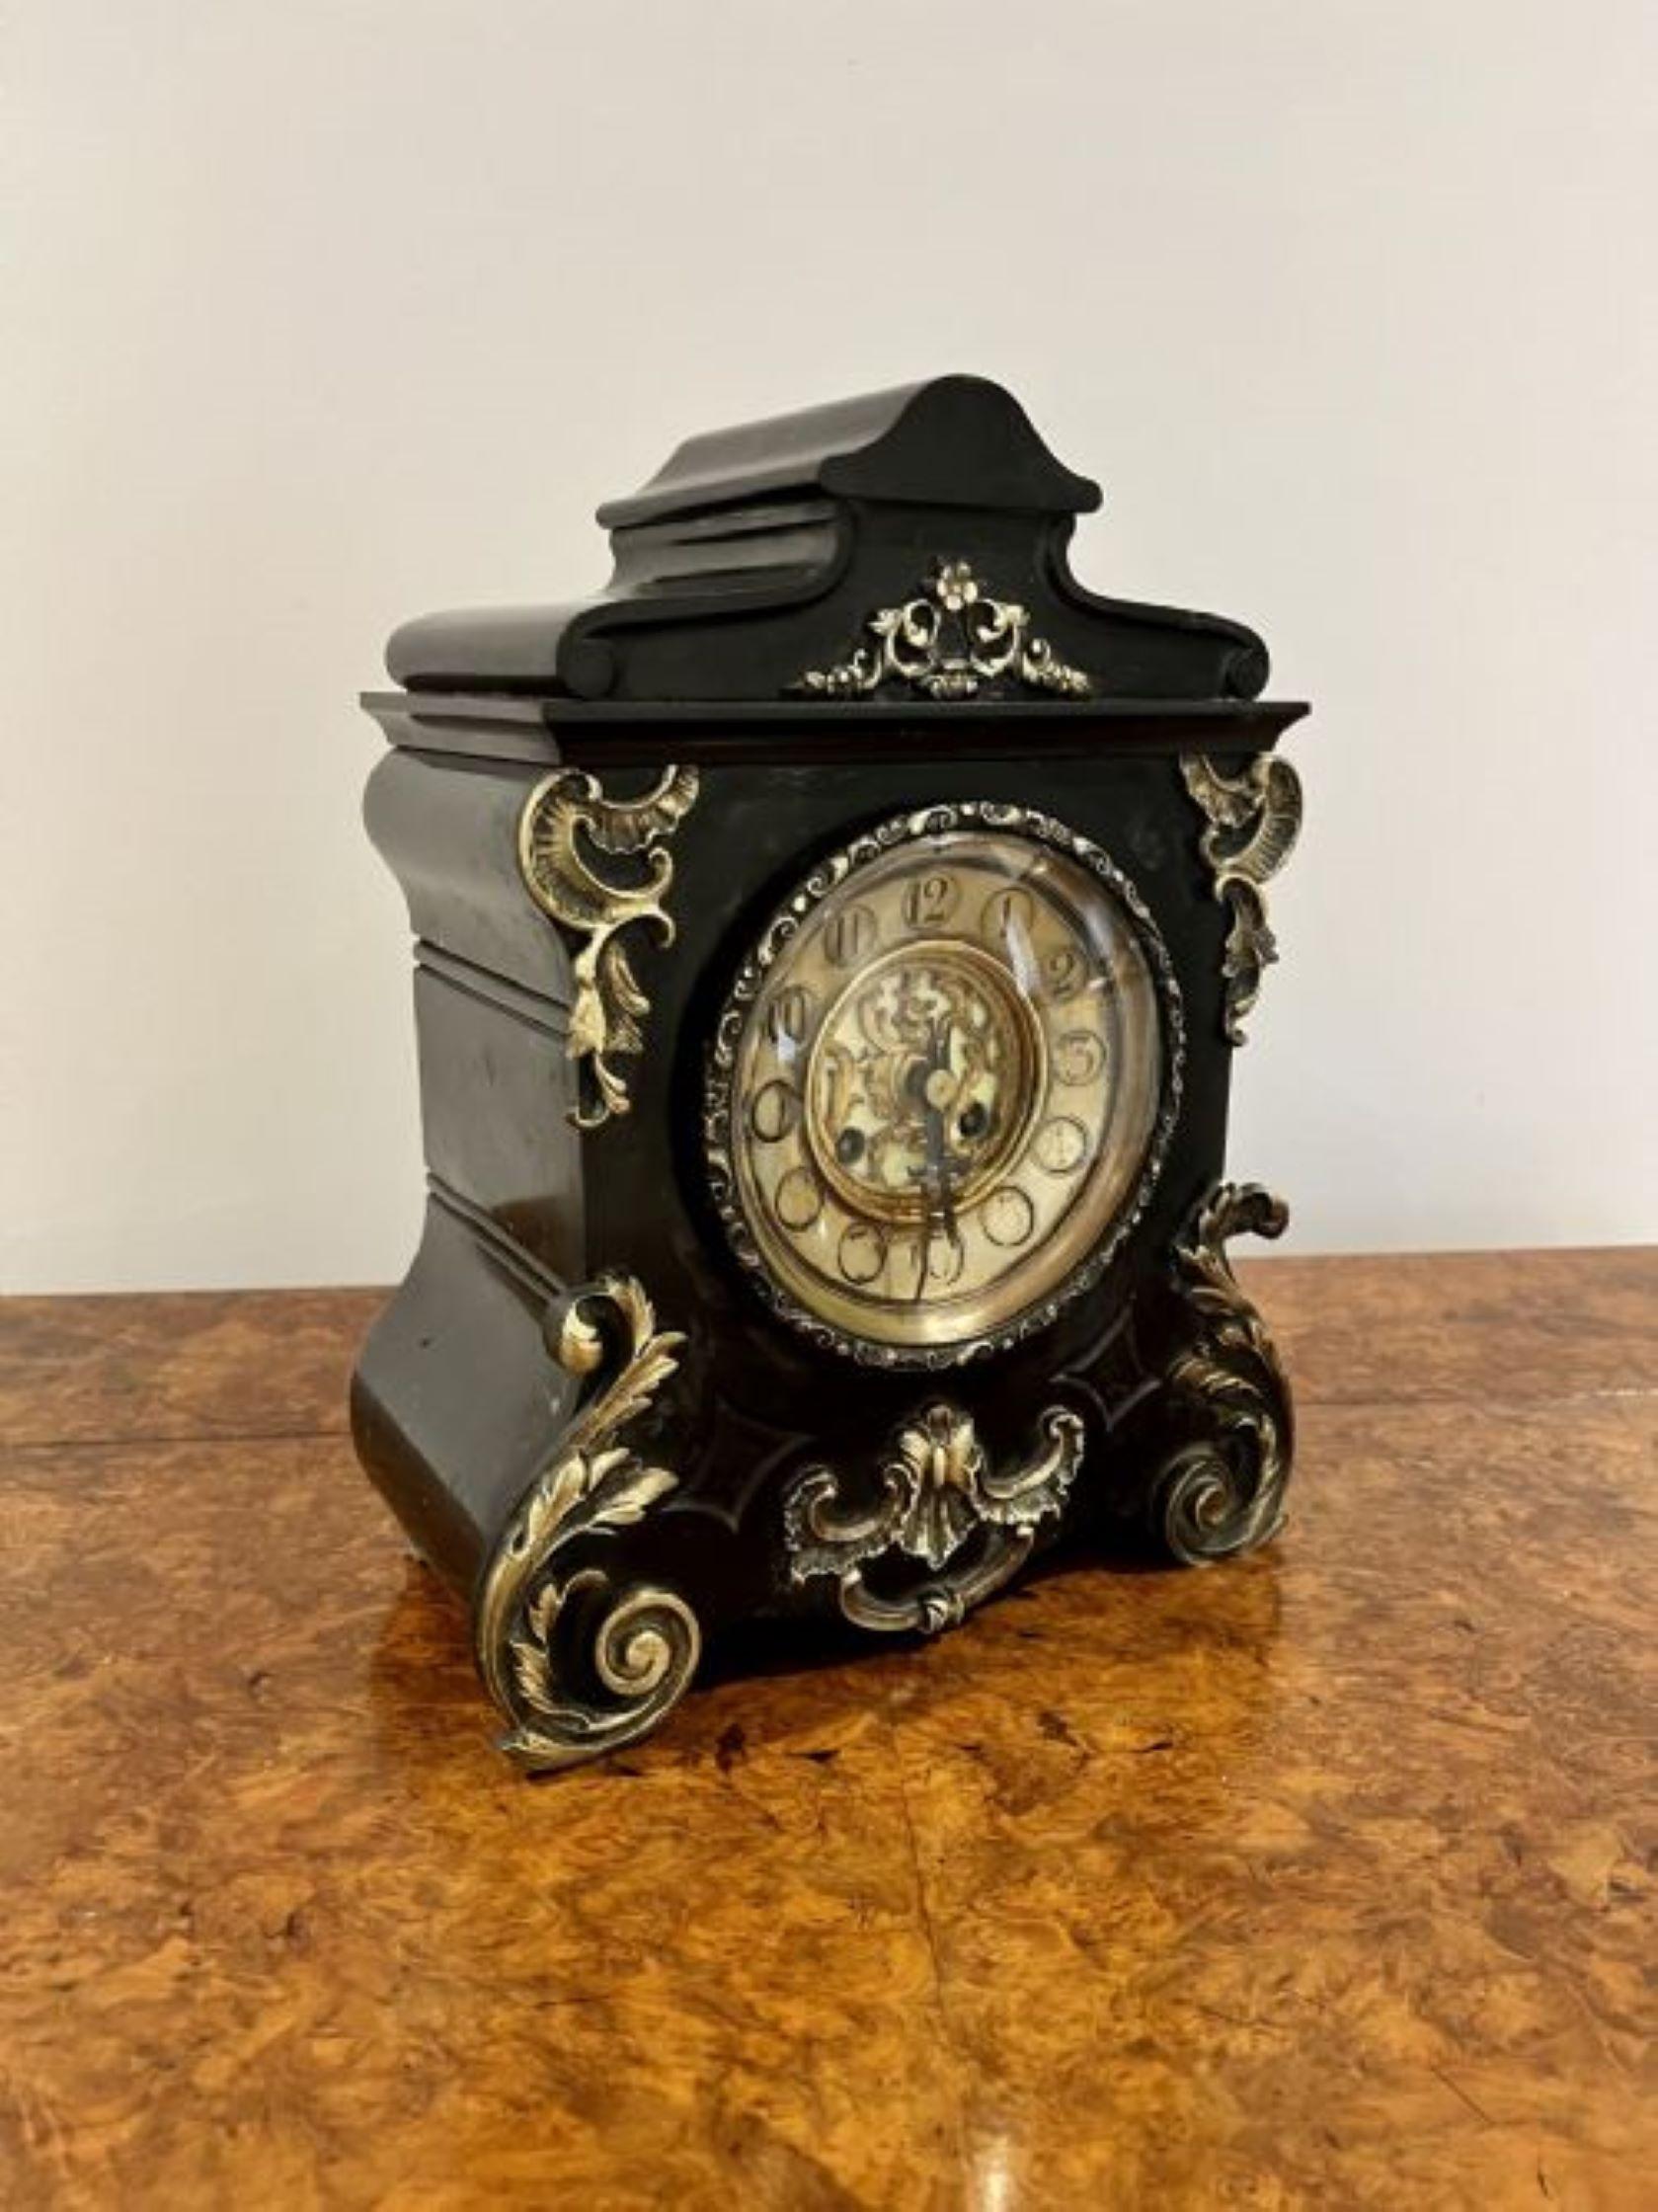 Antique Victorian quality marble eight day mantle clock having a quality black marble mantle clock with ornate gilded brass mounts, circular ornate brass dial with the original hands, eight day French movement striking the hour on a gong having the